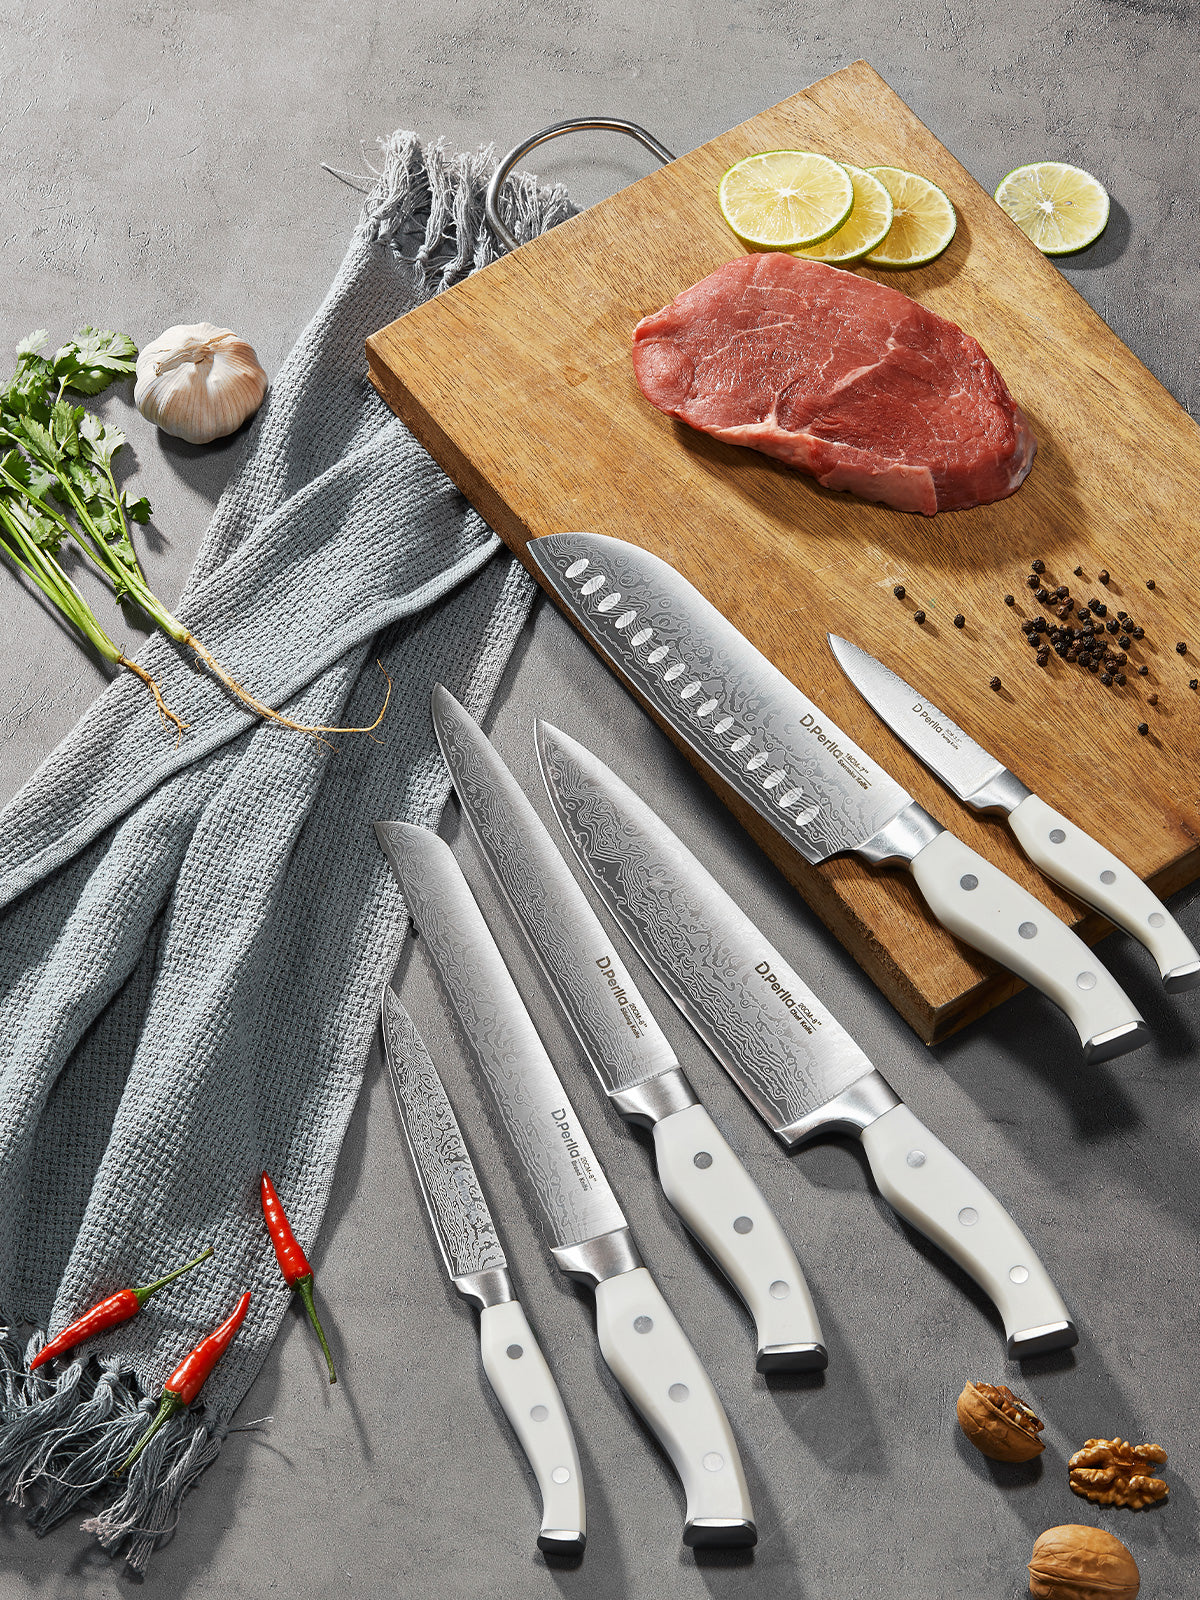 D.Perlla Knife Set, 14 PCS Knife Block Set with Sharpener, Stainless Steel kitchen Knives Set with Unique Waved Pattern, White